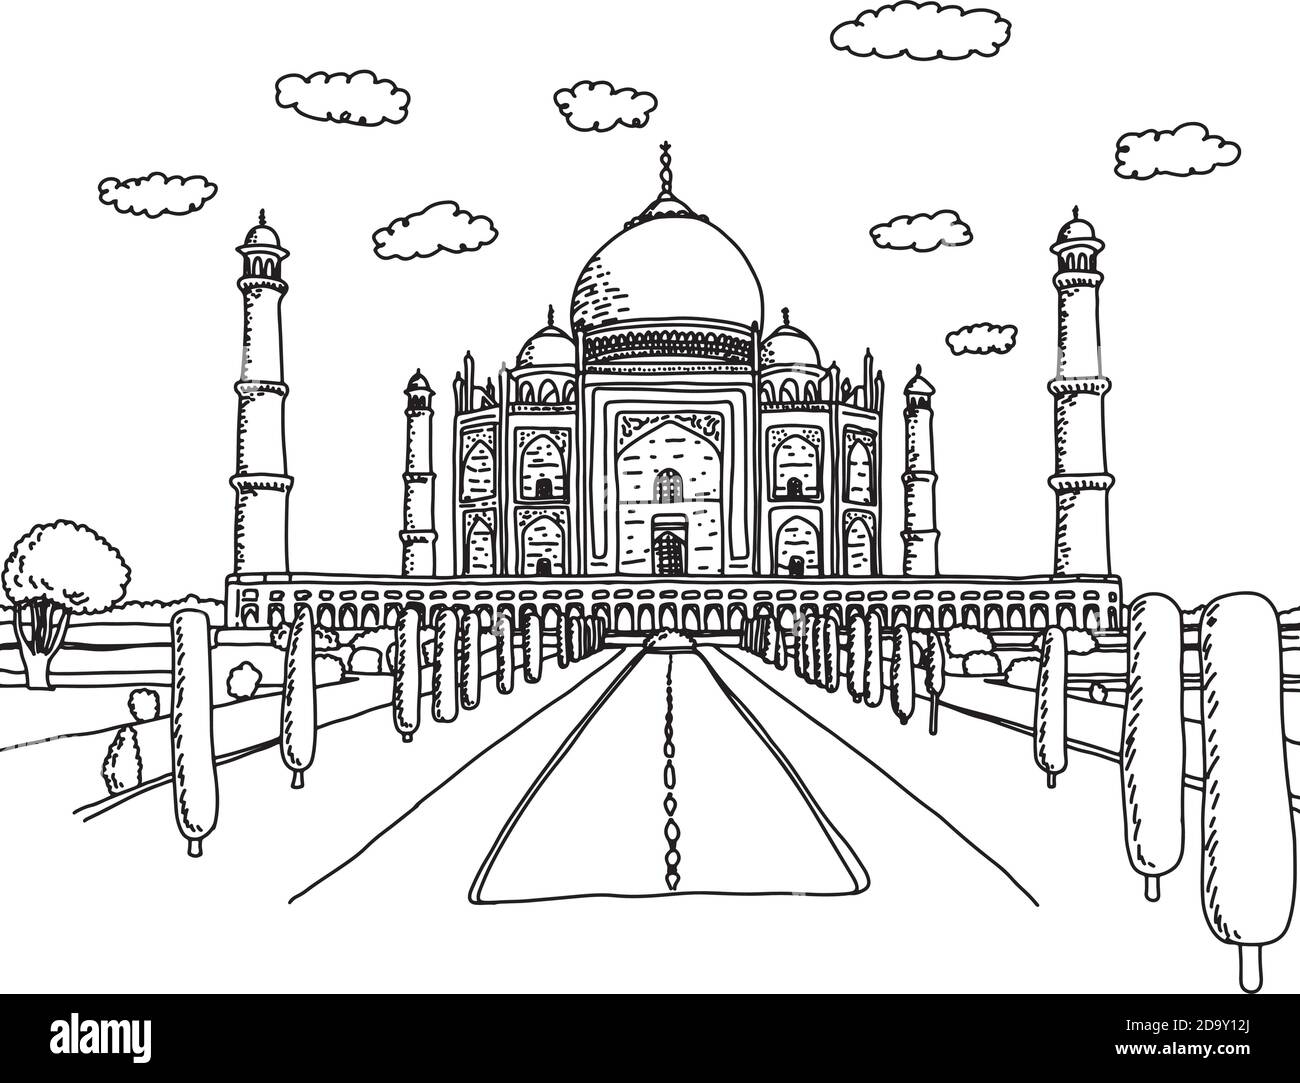 Taj mahal landmark vector illustration sketch doodle hand drawn with black lines isolated on white background Stock Vector